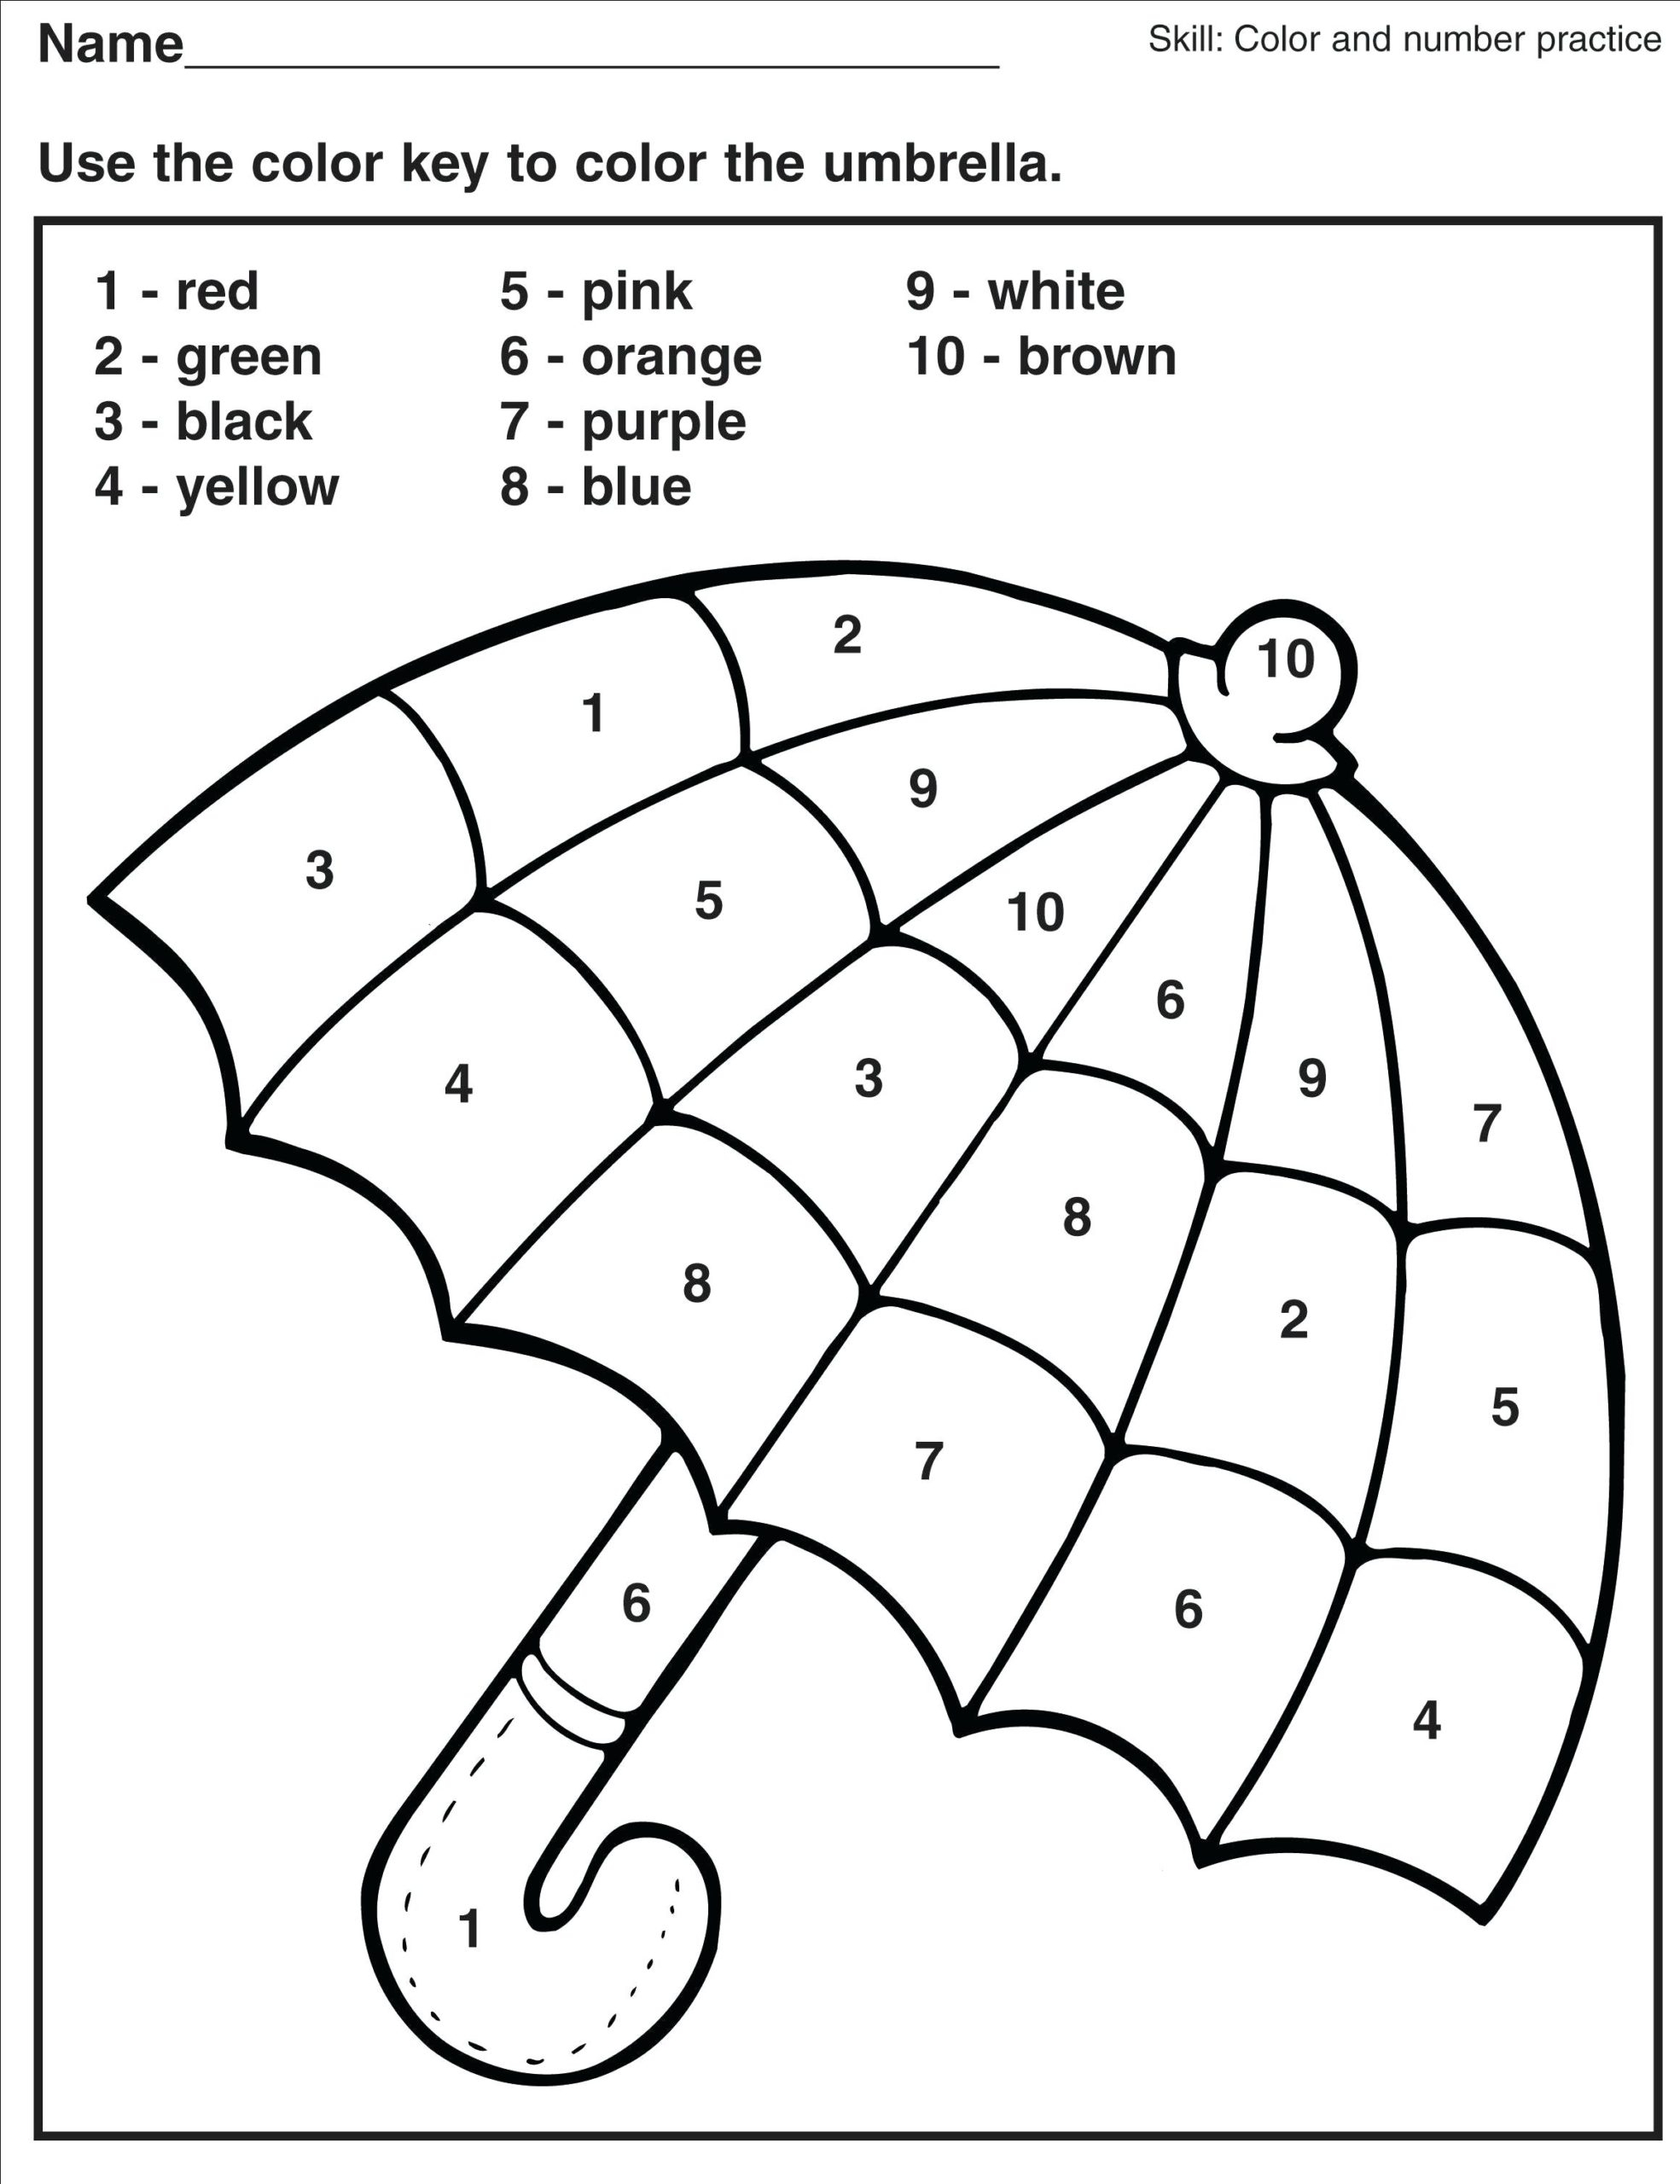 Coloring Pages : Most Magnificent Free Printable Color throughout Free Printable Halloween Multiplication Color By Number